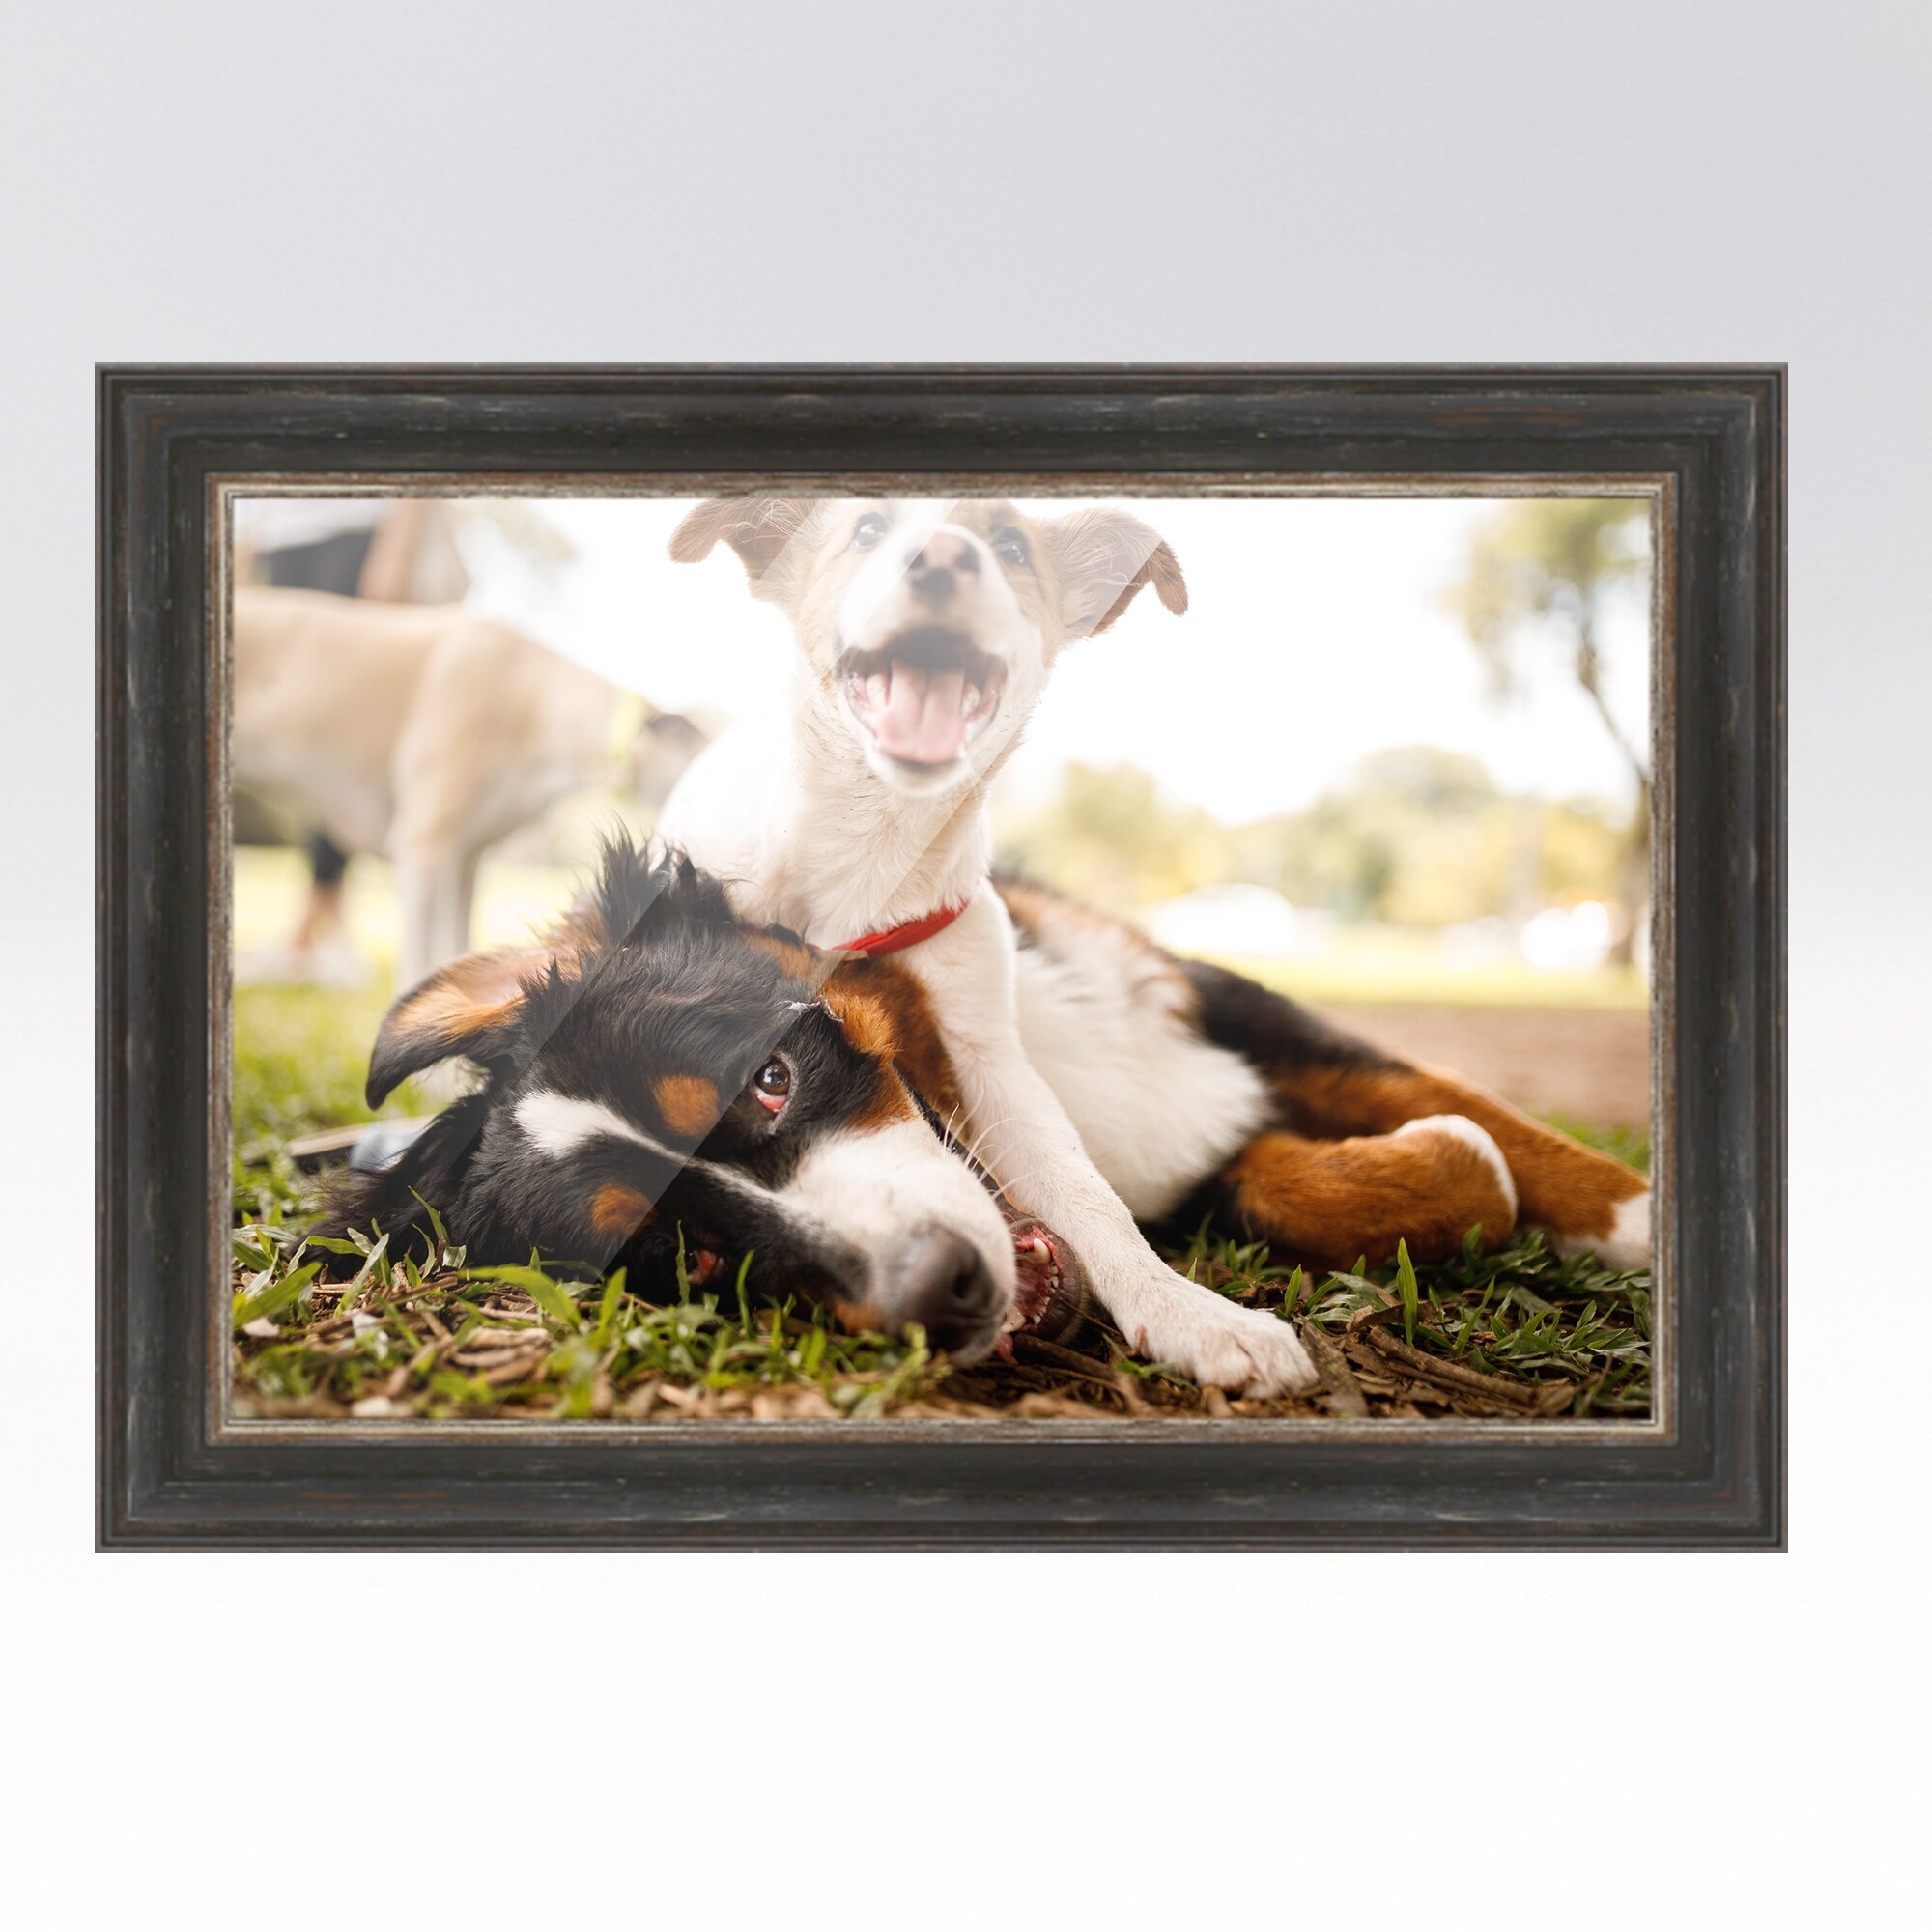 23x35 Black Picture Frame - Wood Picture Frame Complete with UV